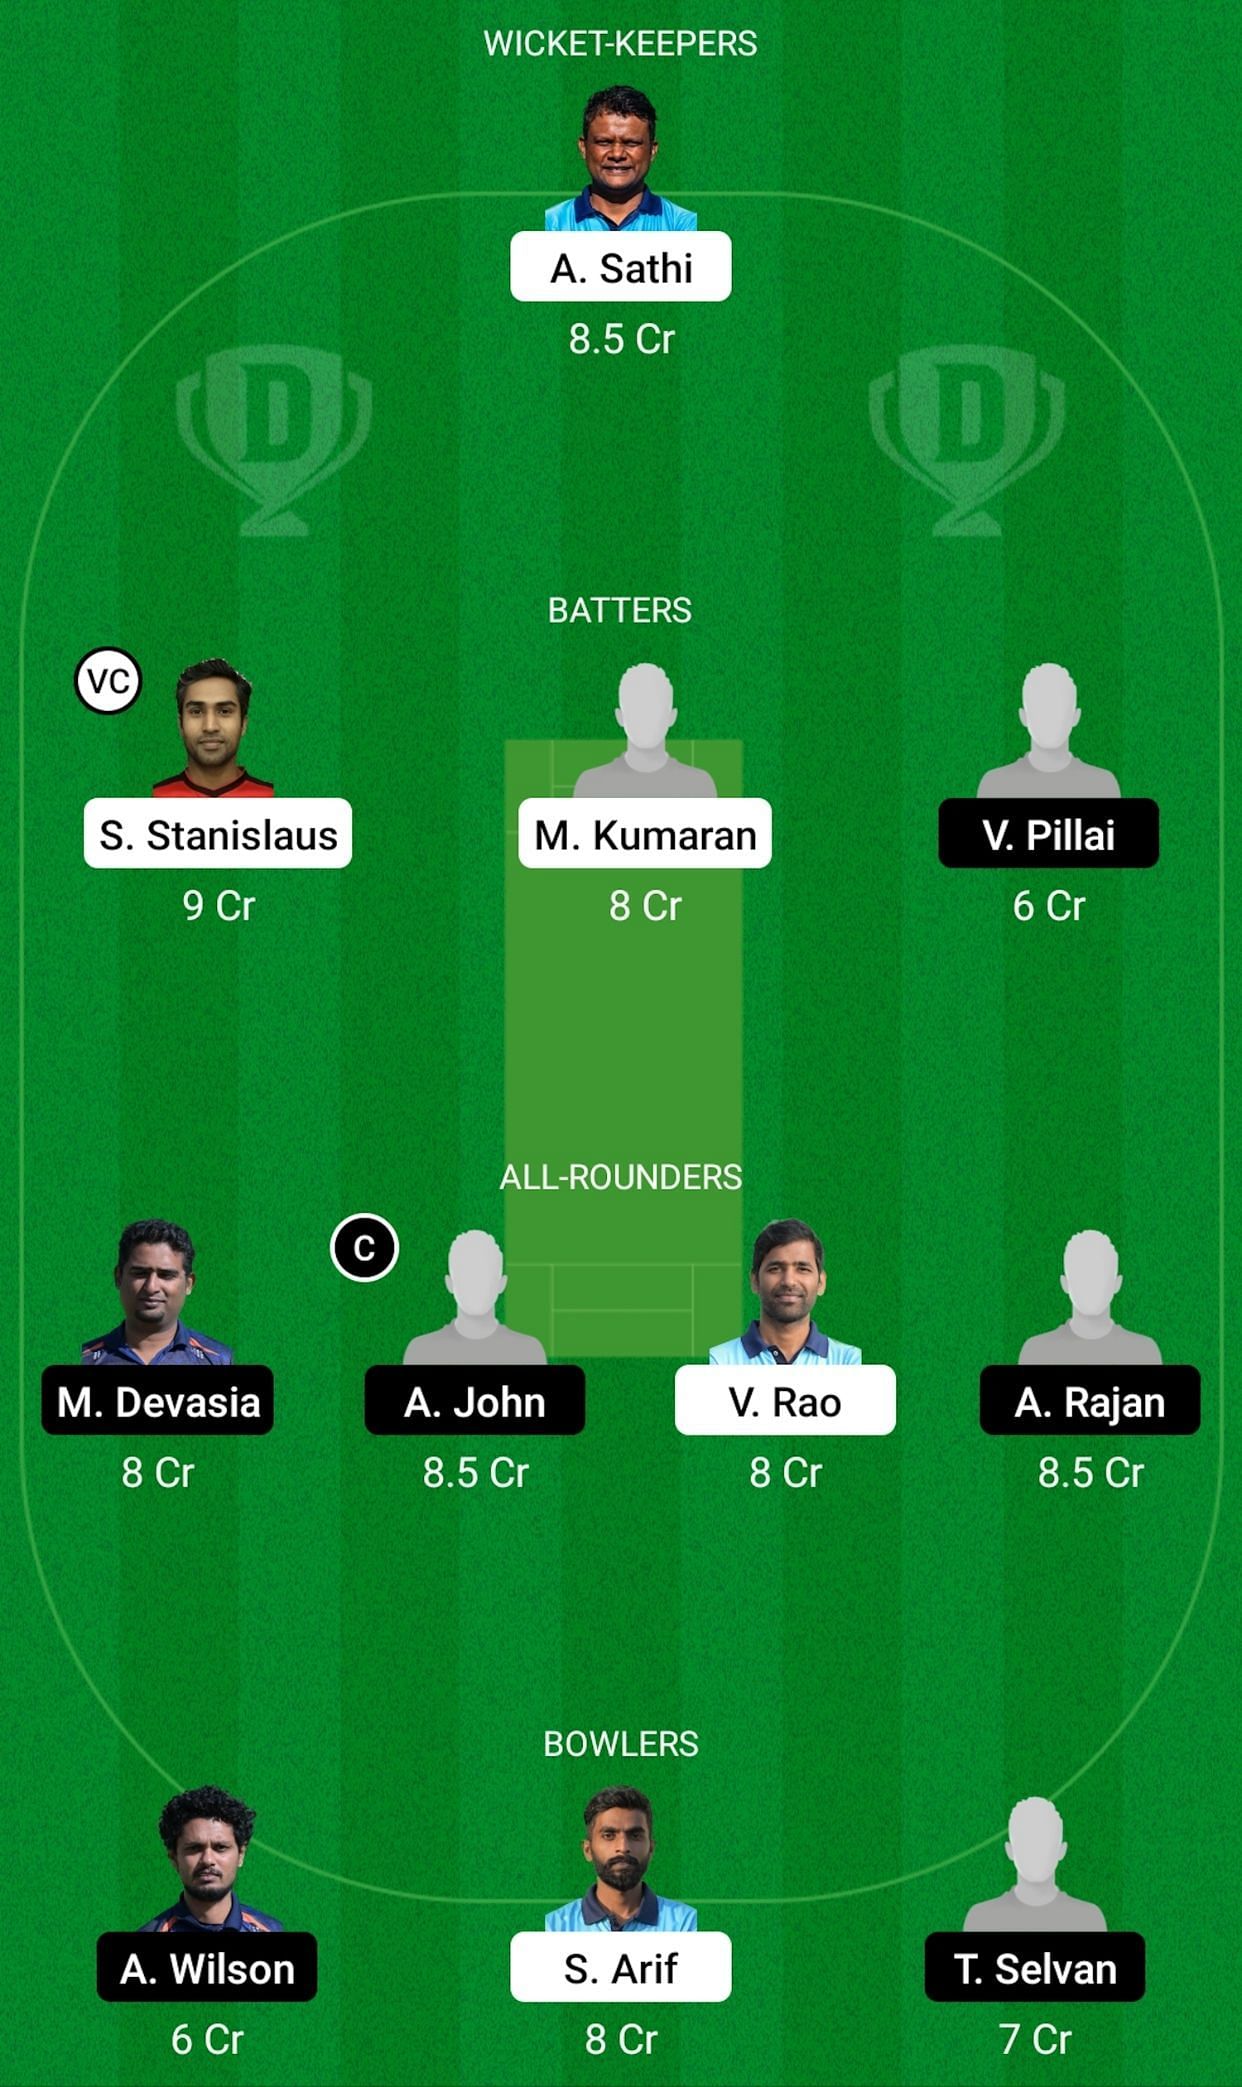 MTD vs VLS Dream11 Prediction Team Today, Match 49 and 50, Head to Head League